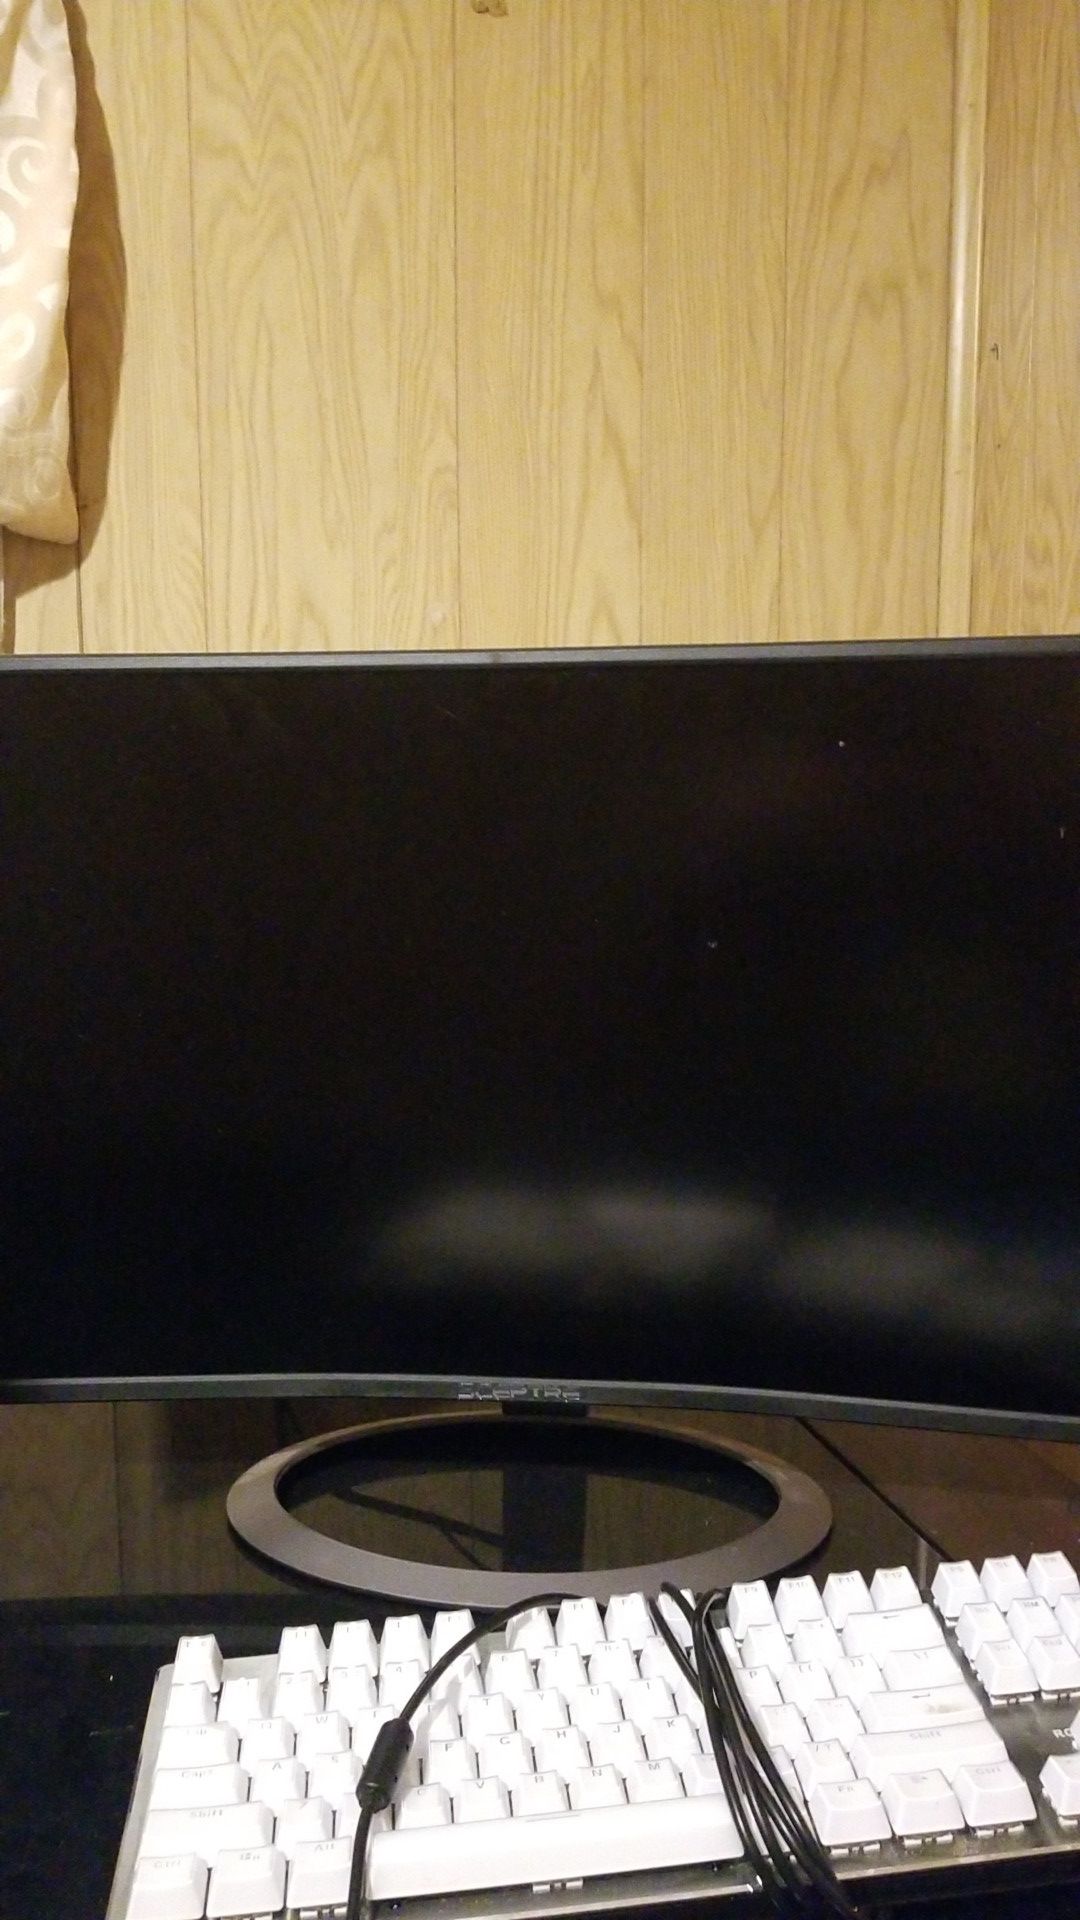 Specter 24 inch curved monitor